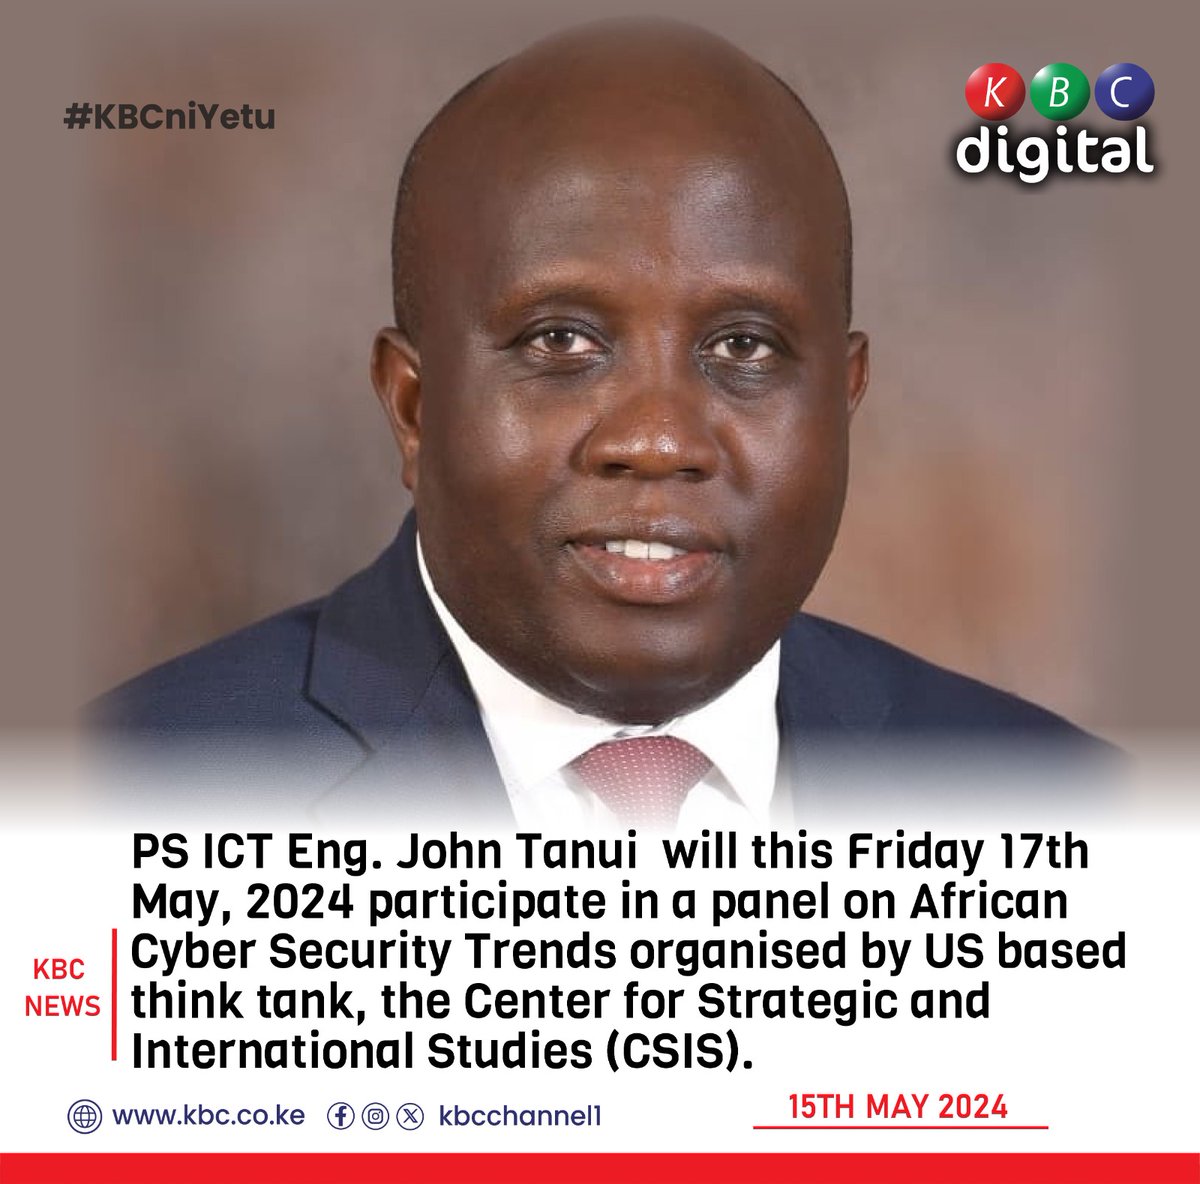 PS ICT Eng. John Tanui will this Friday 17th May, 2024 participate in a panel on African Cyber Security Trends organised by US based think tank, the Center for Strategic and International Studies (CSIS). #KBCniYetu ^RO